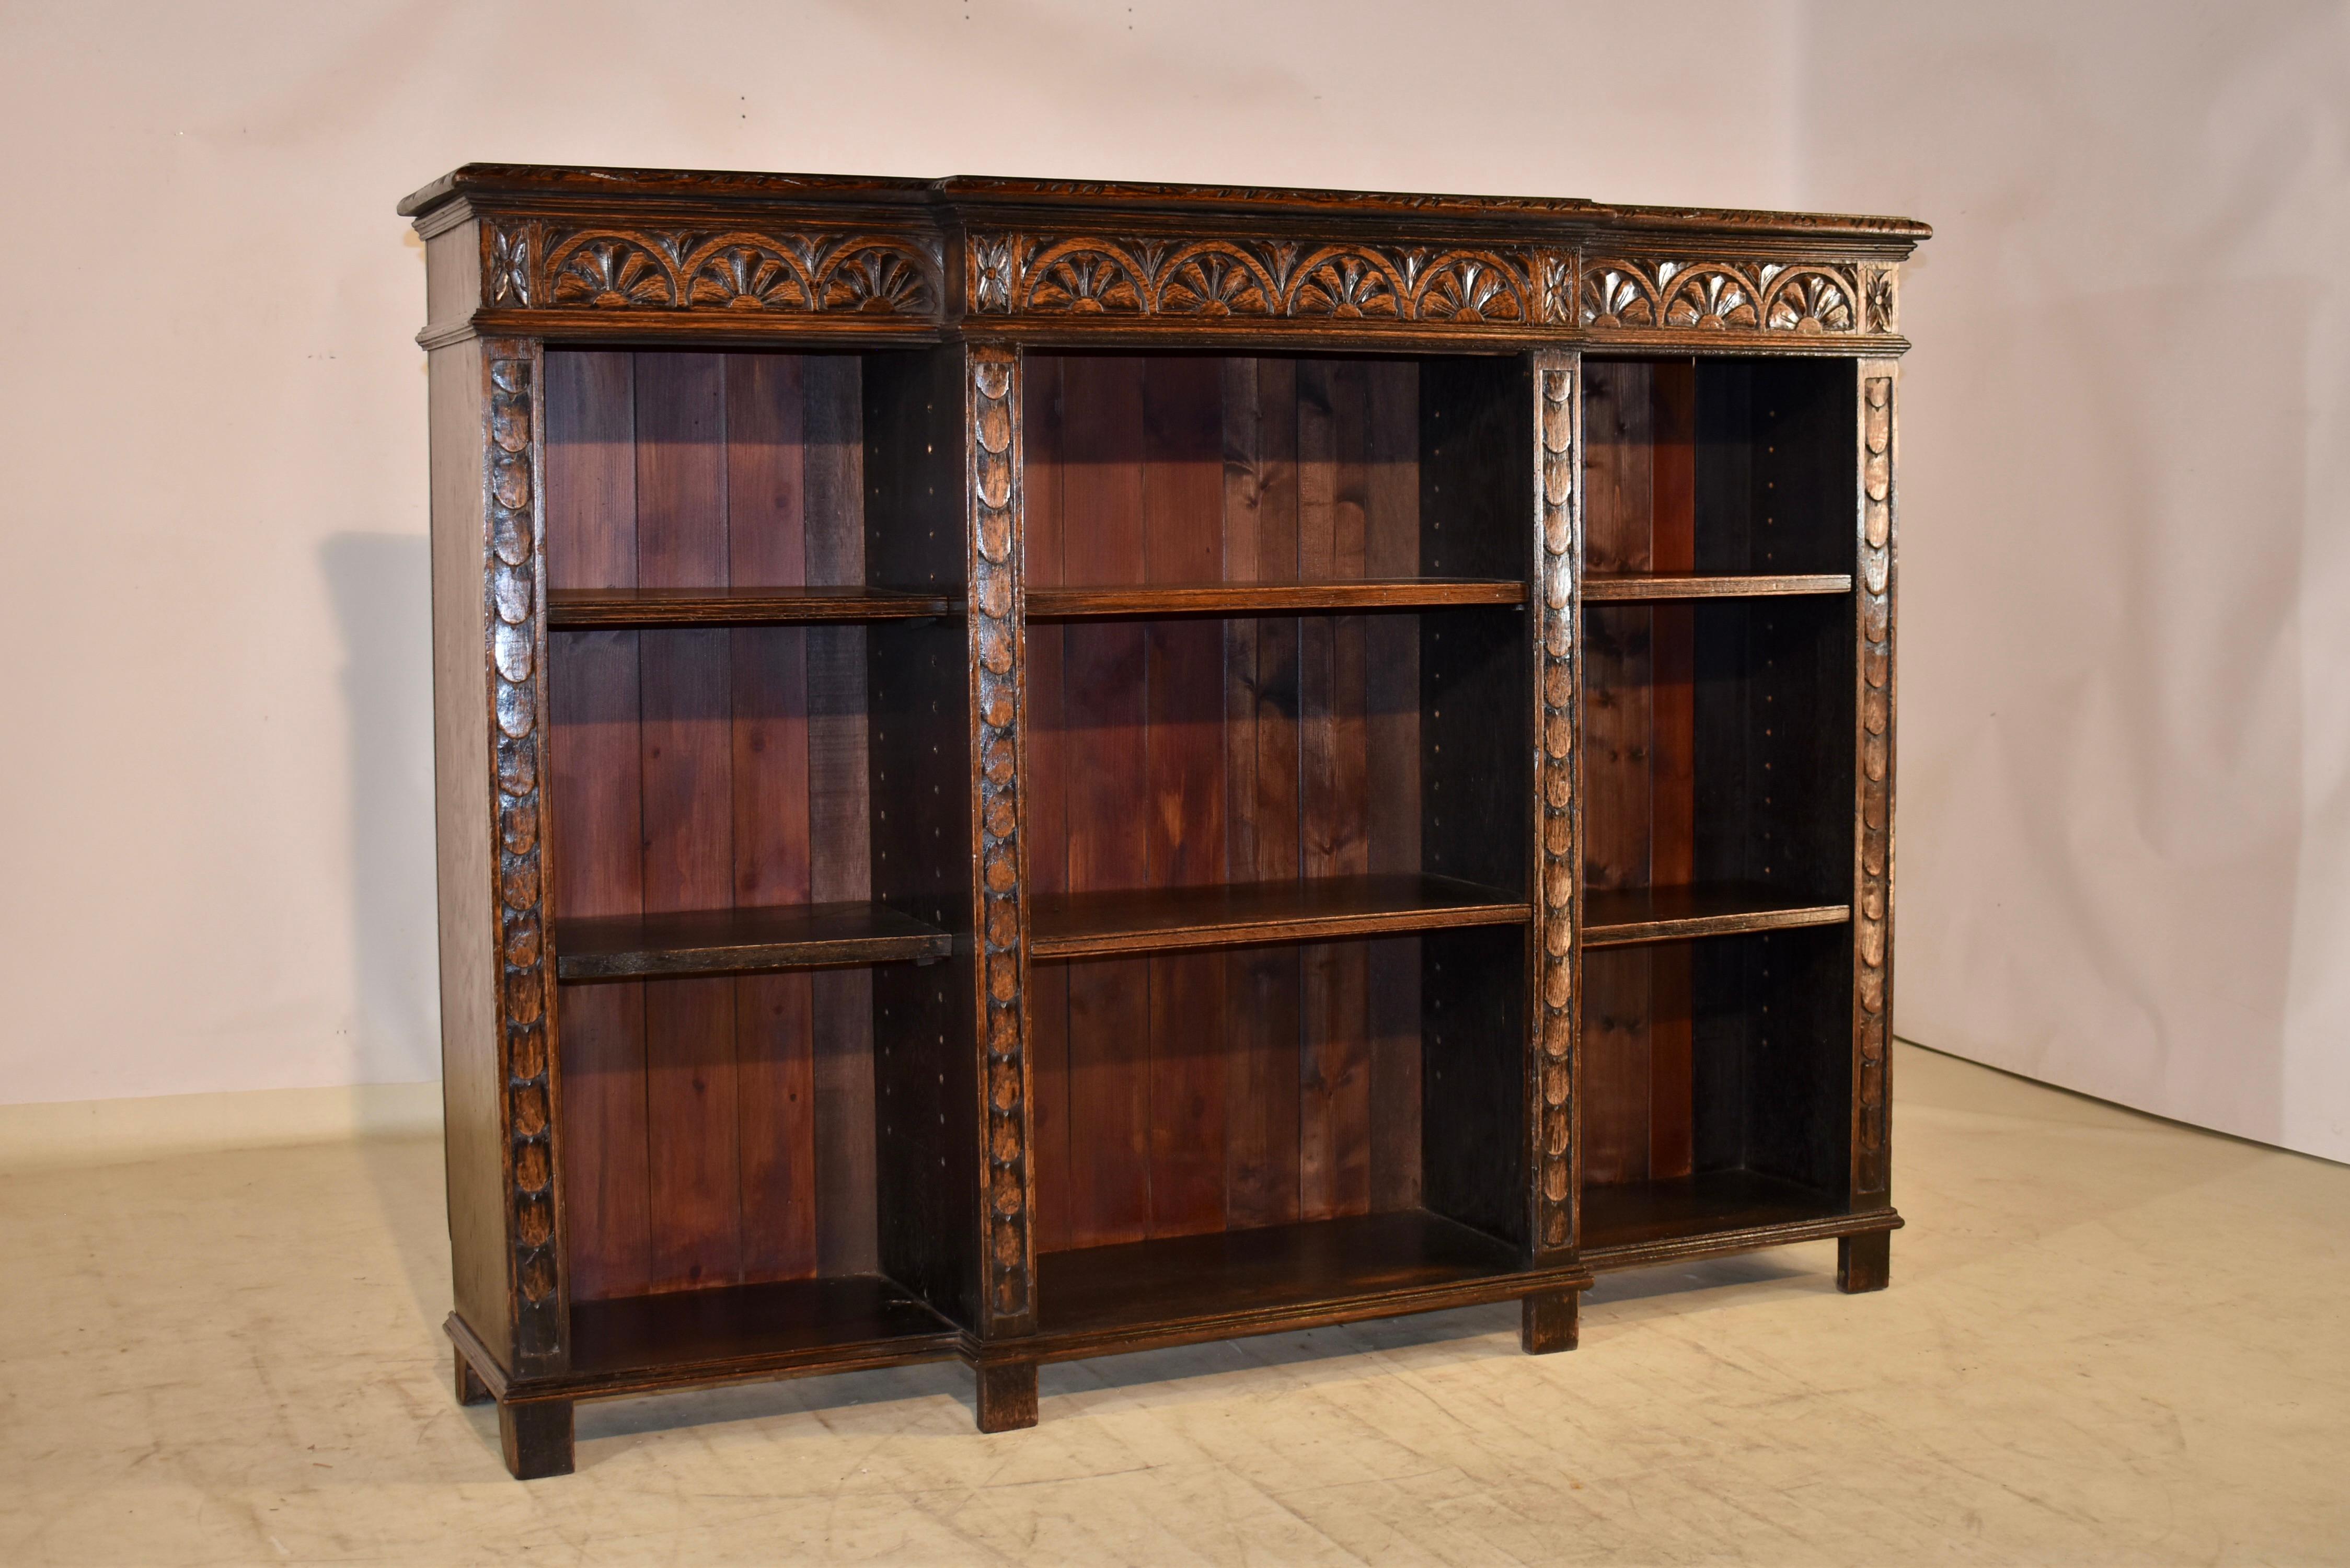 19th century oak breakfront bookcase from England.  The top is made from a single board, and has a beveled and hand carved decorated edge, following down to simple sides and a hand carved decorated apron over three sections of bookcase, each with